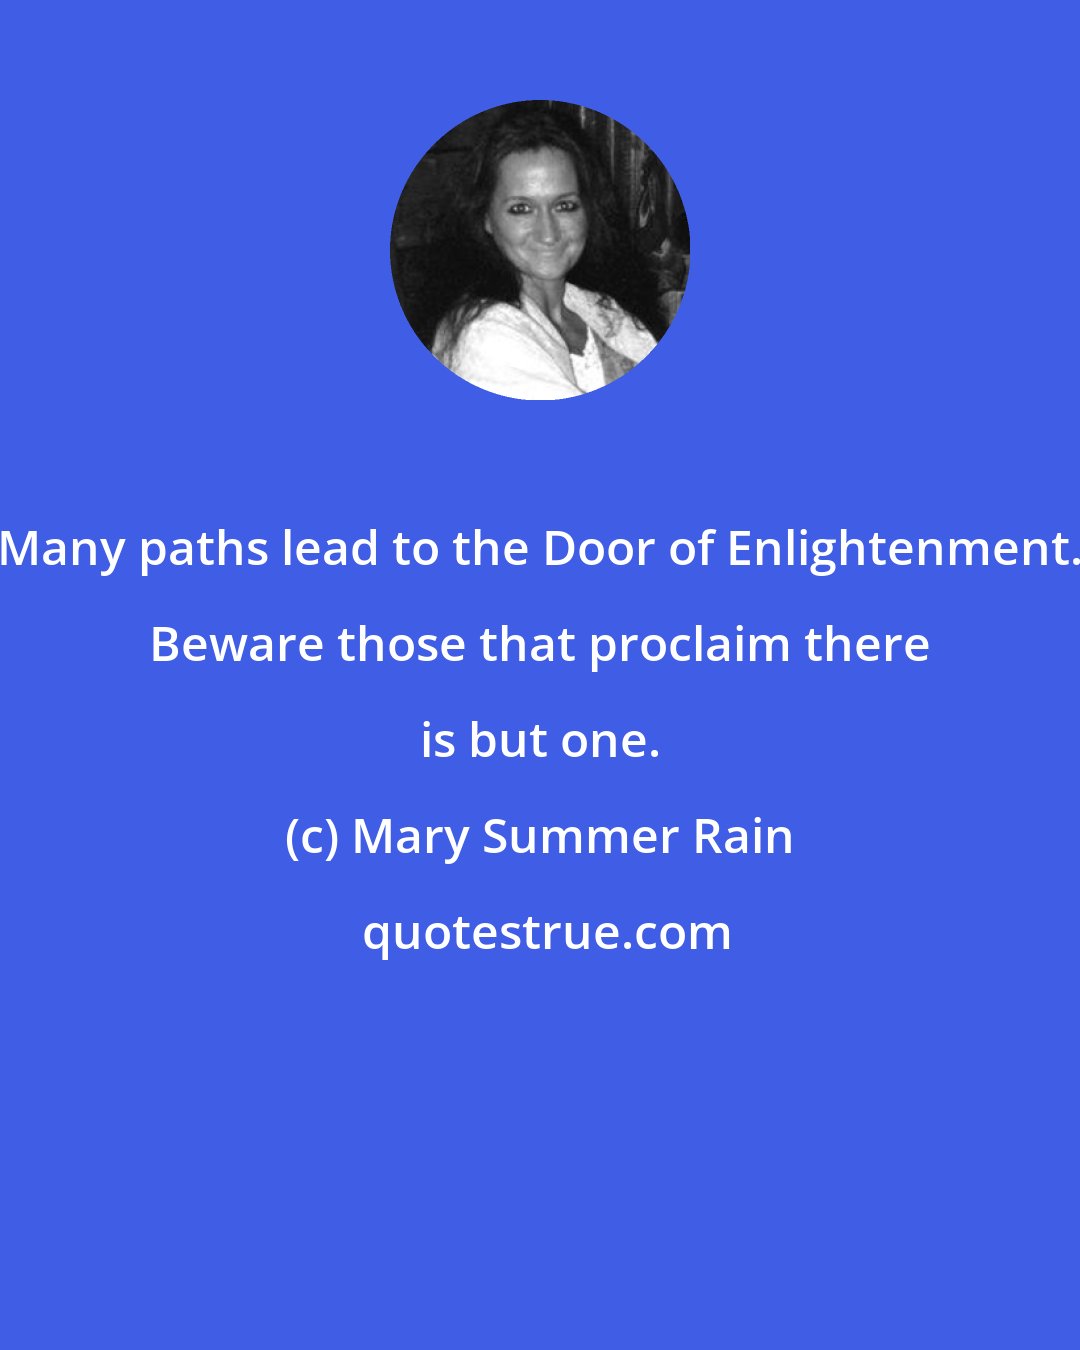 Mary Summer Rain: Many paths lead to the Door of Enlightenment. Beware those that proclaim there is but one.